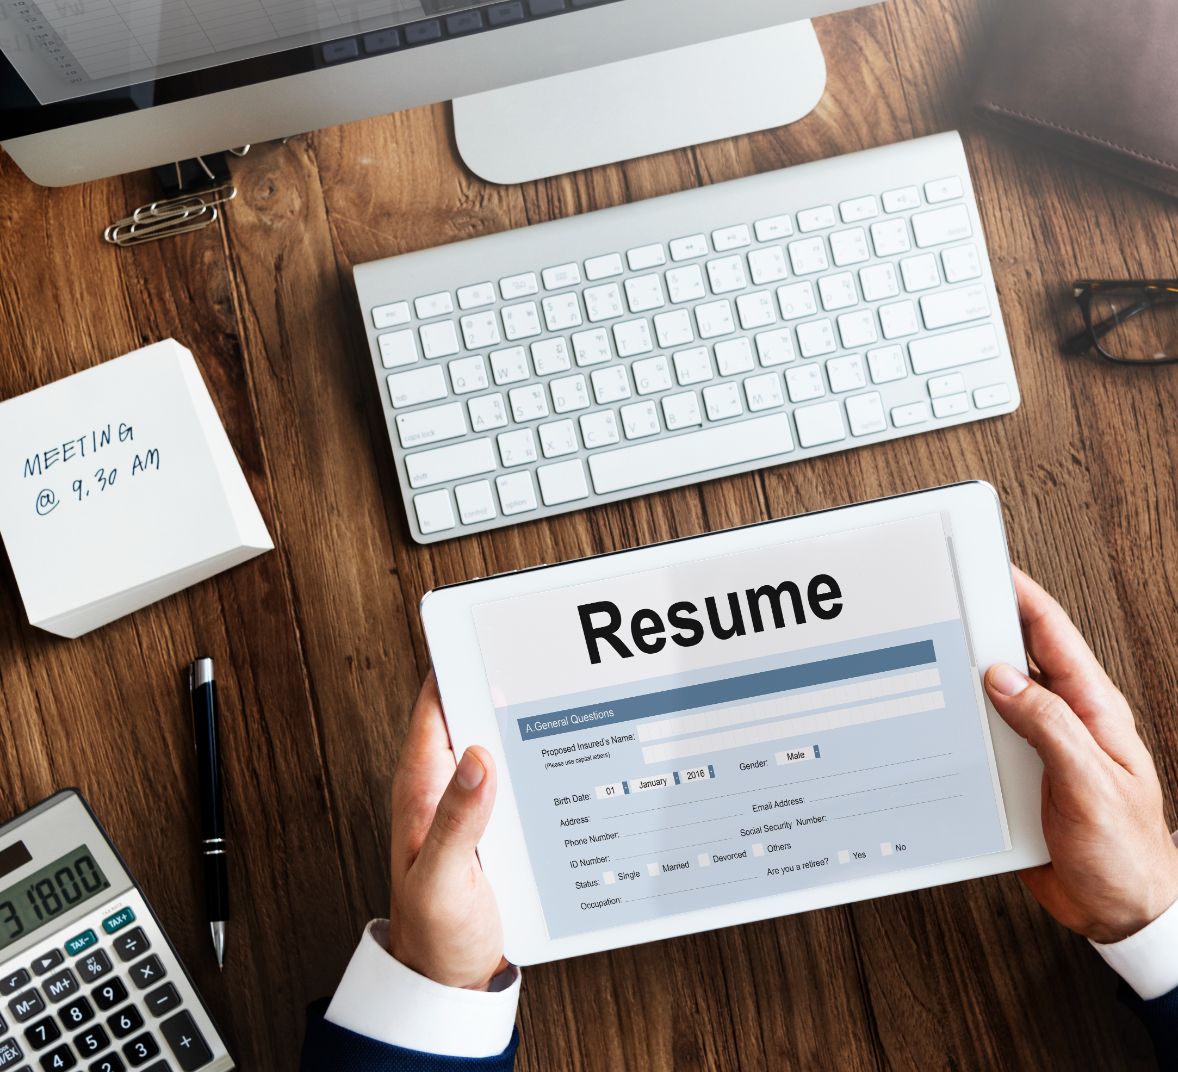 HR viewing the candidate’s resume 